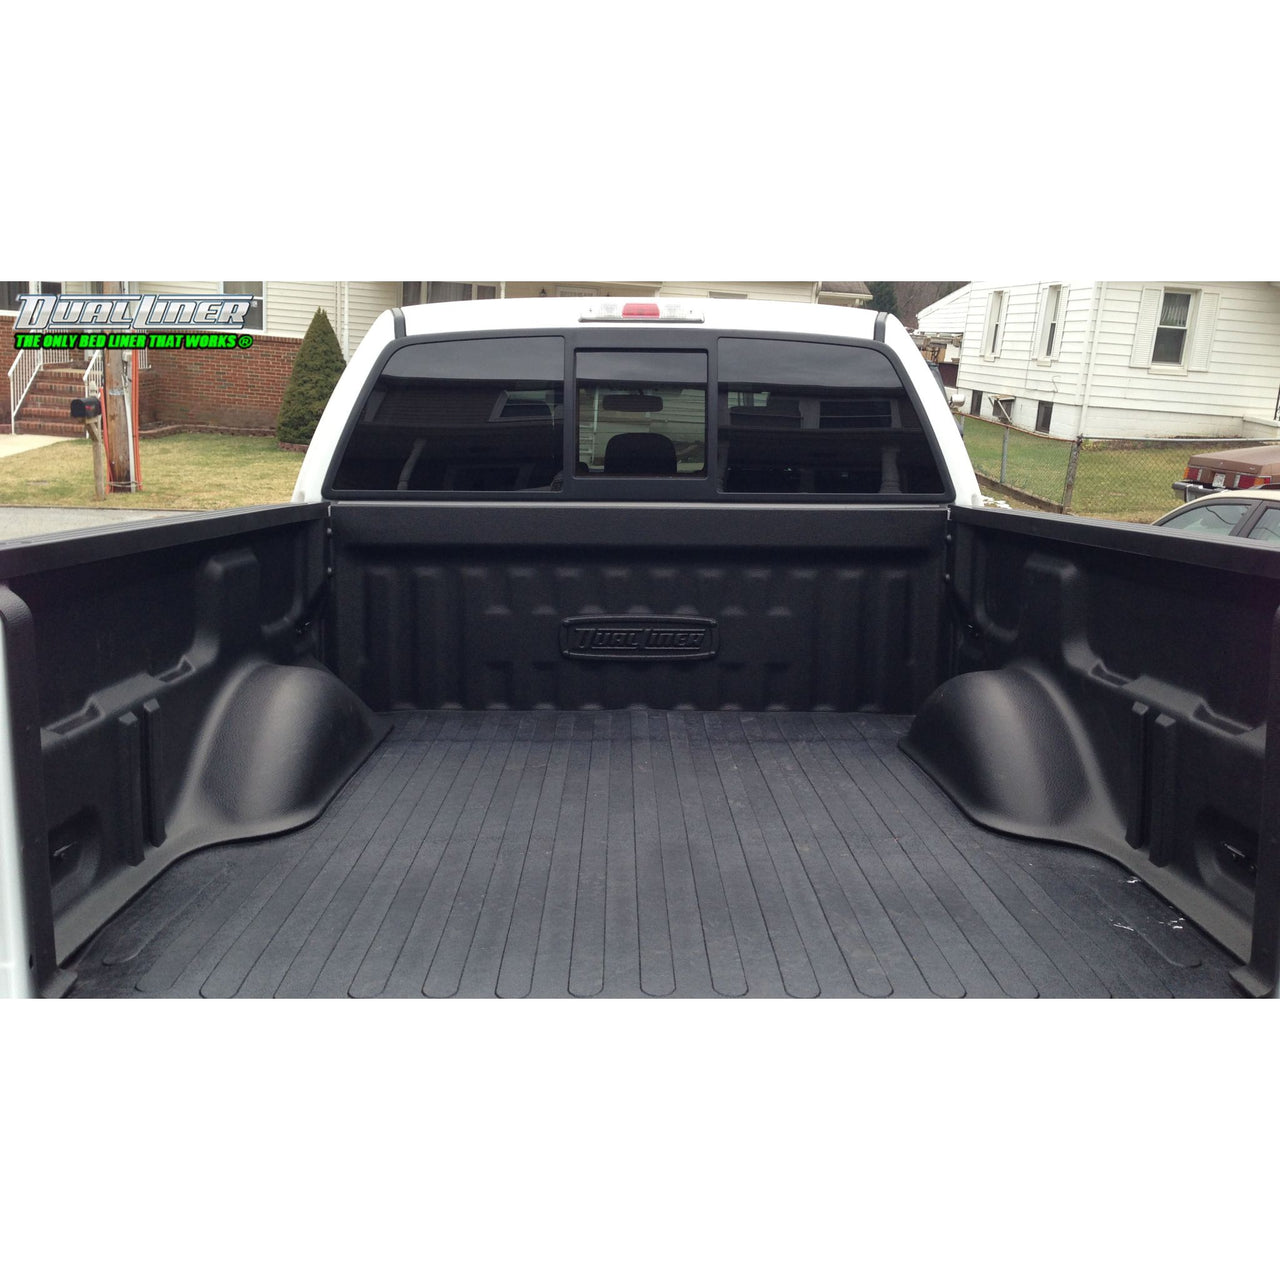 DualLiner 2021 to 2022 F-150 (WITH LED Light Bar) - Long 8' Bed